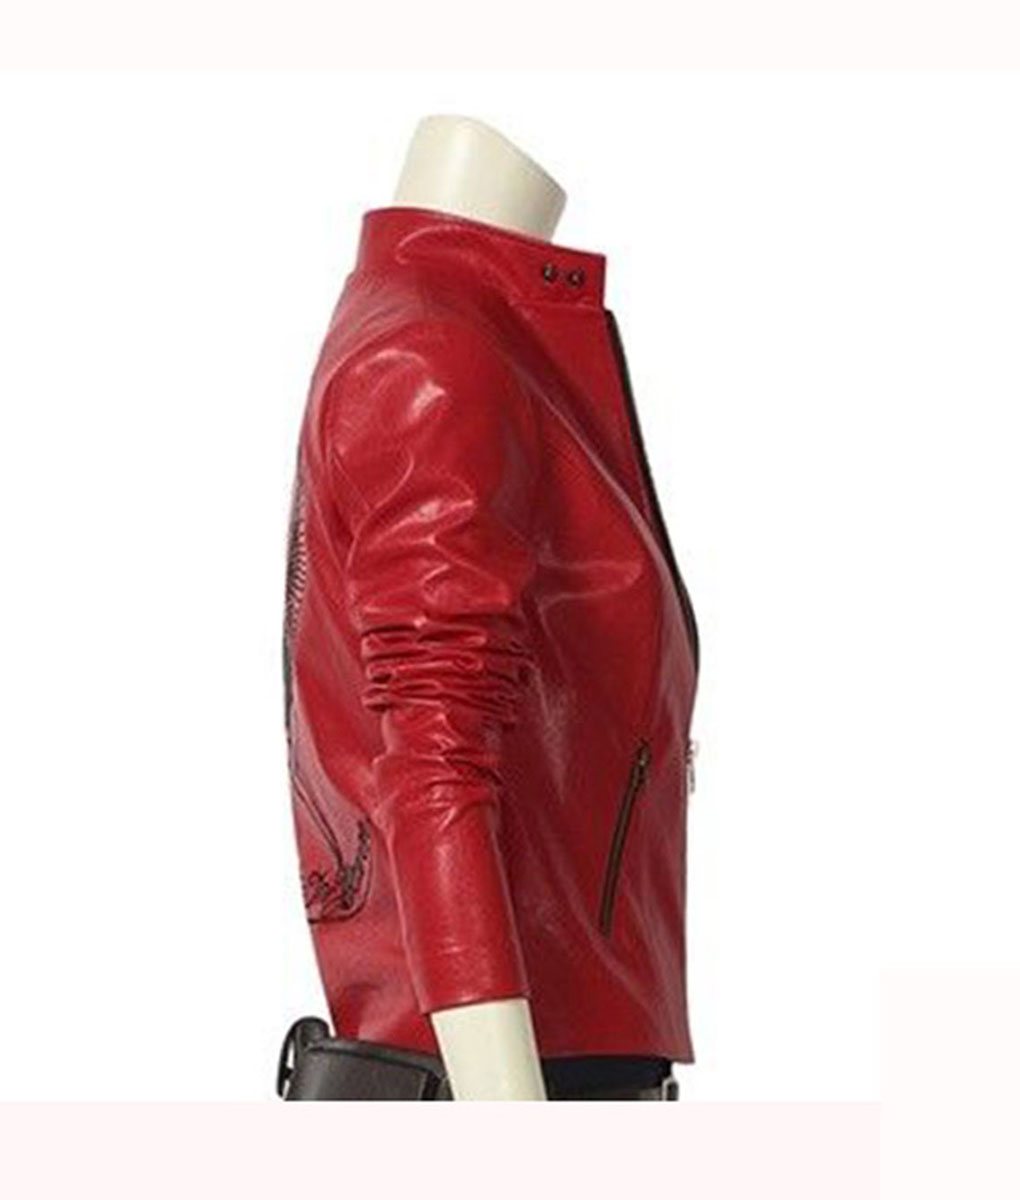 Resident Evil 2 Claire Redfield Jacket